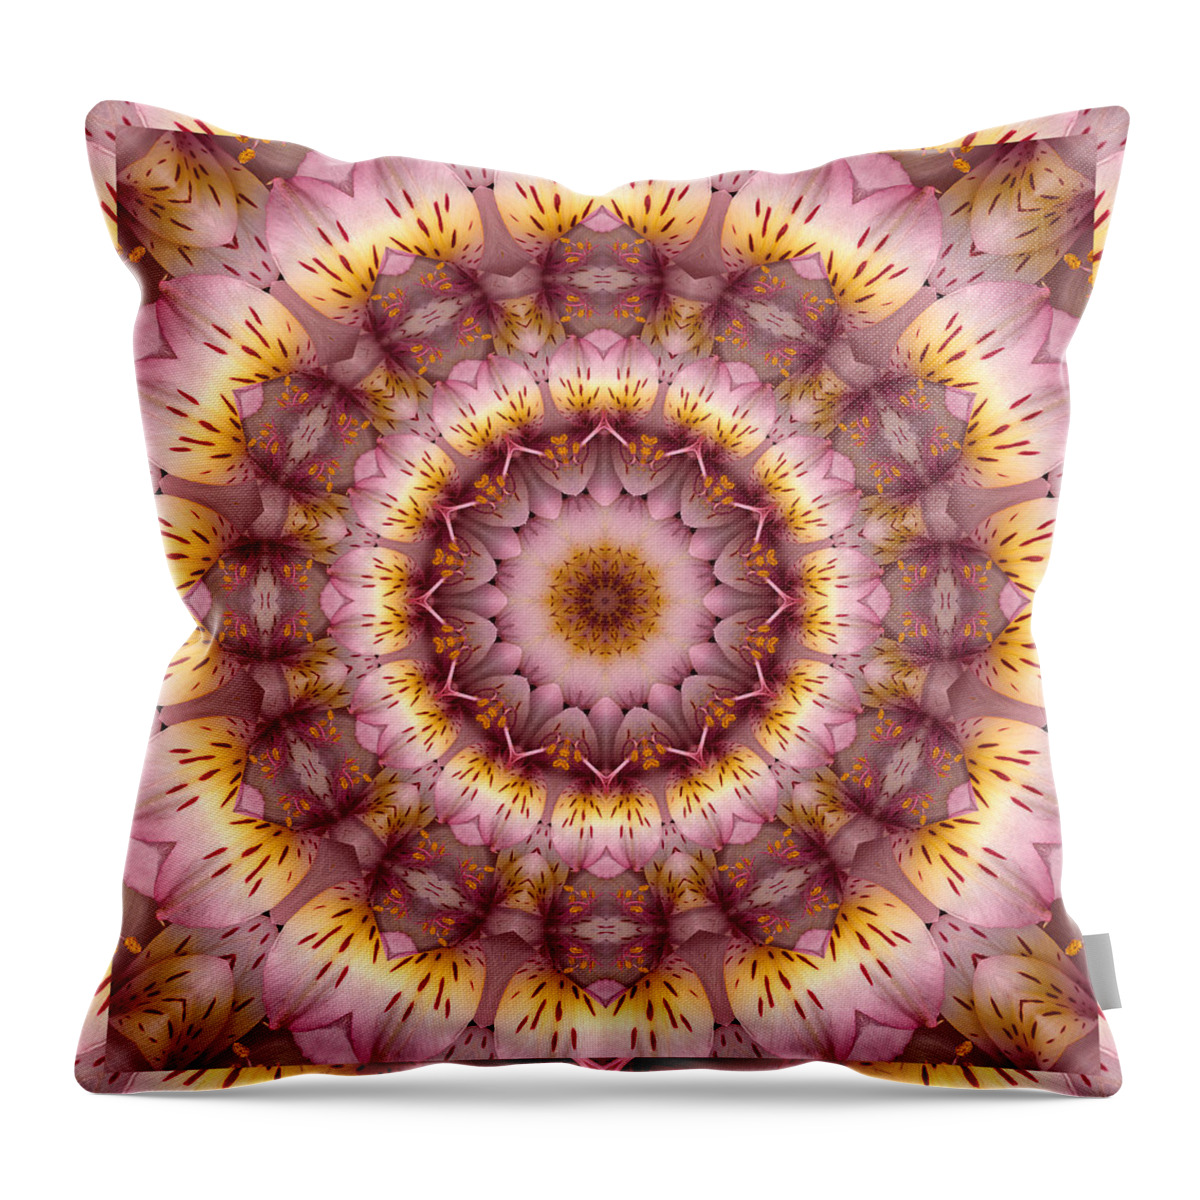 Mandalas Throw Pillow featuring the photograph Inspiration by Bell And Todd